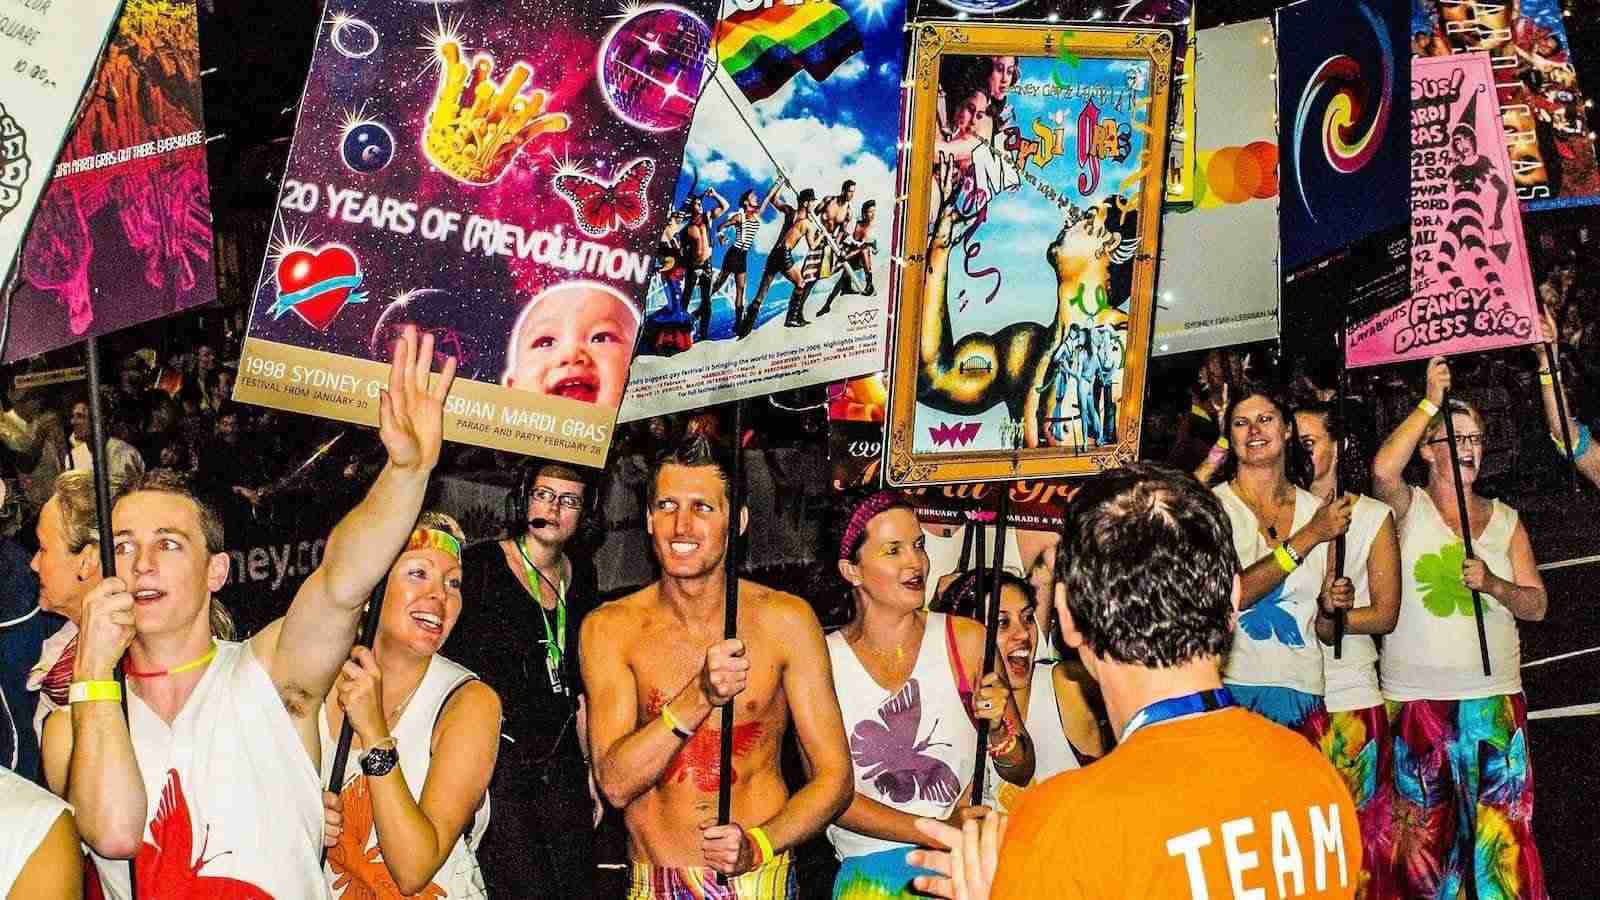 Sydney Mardi Gras in one of the most gay cities in the world